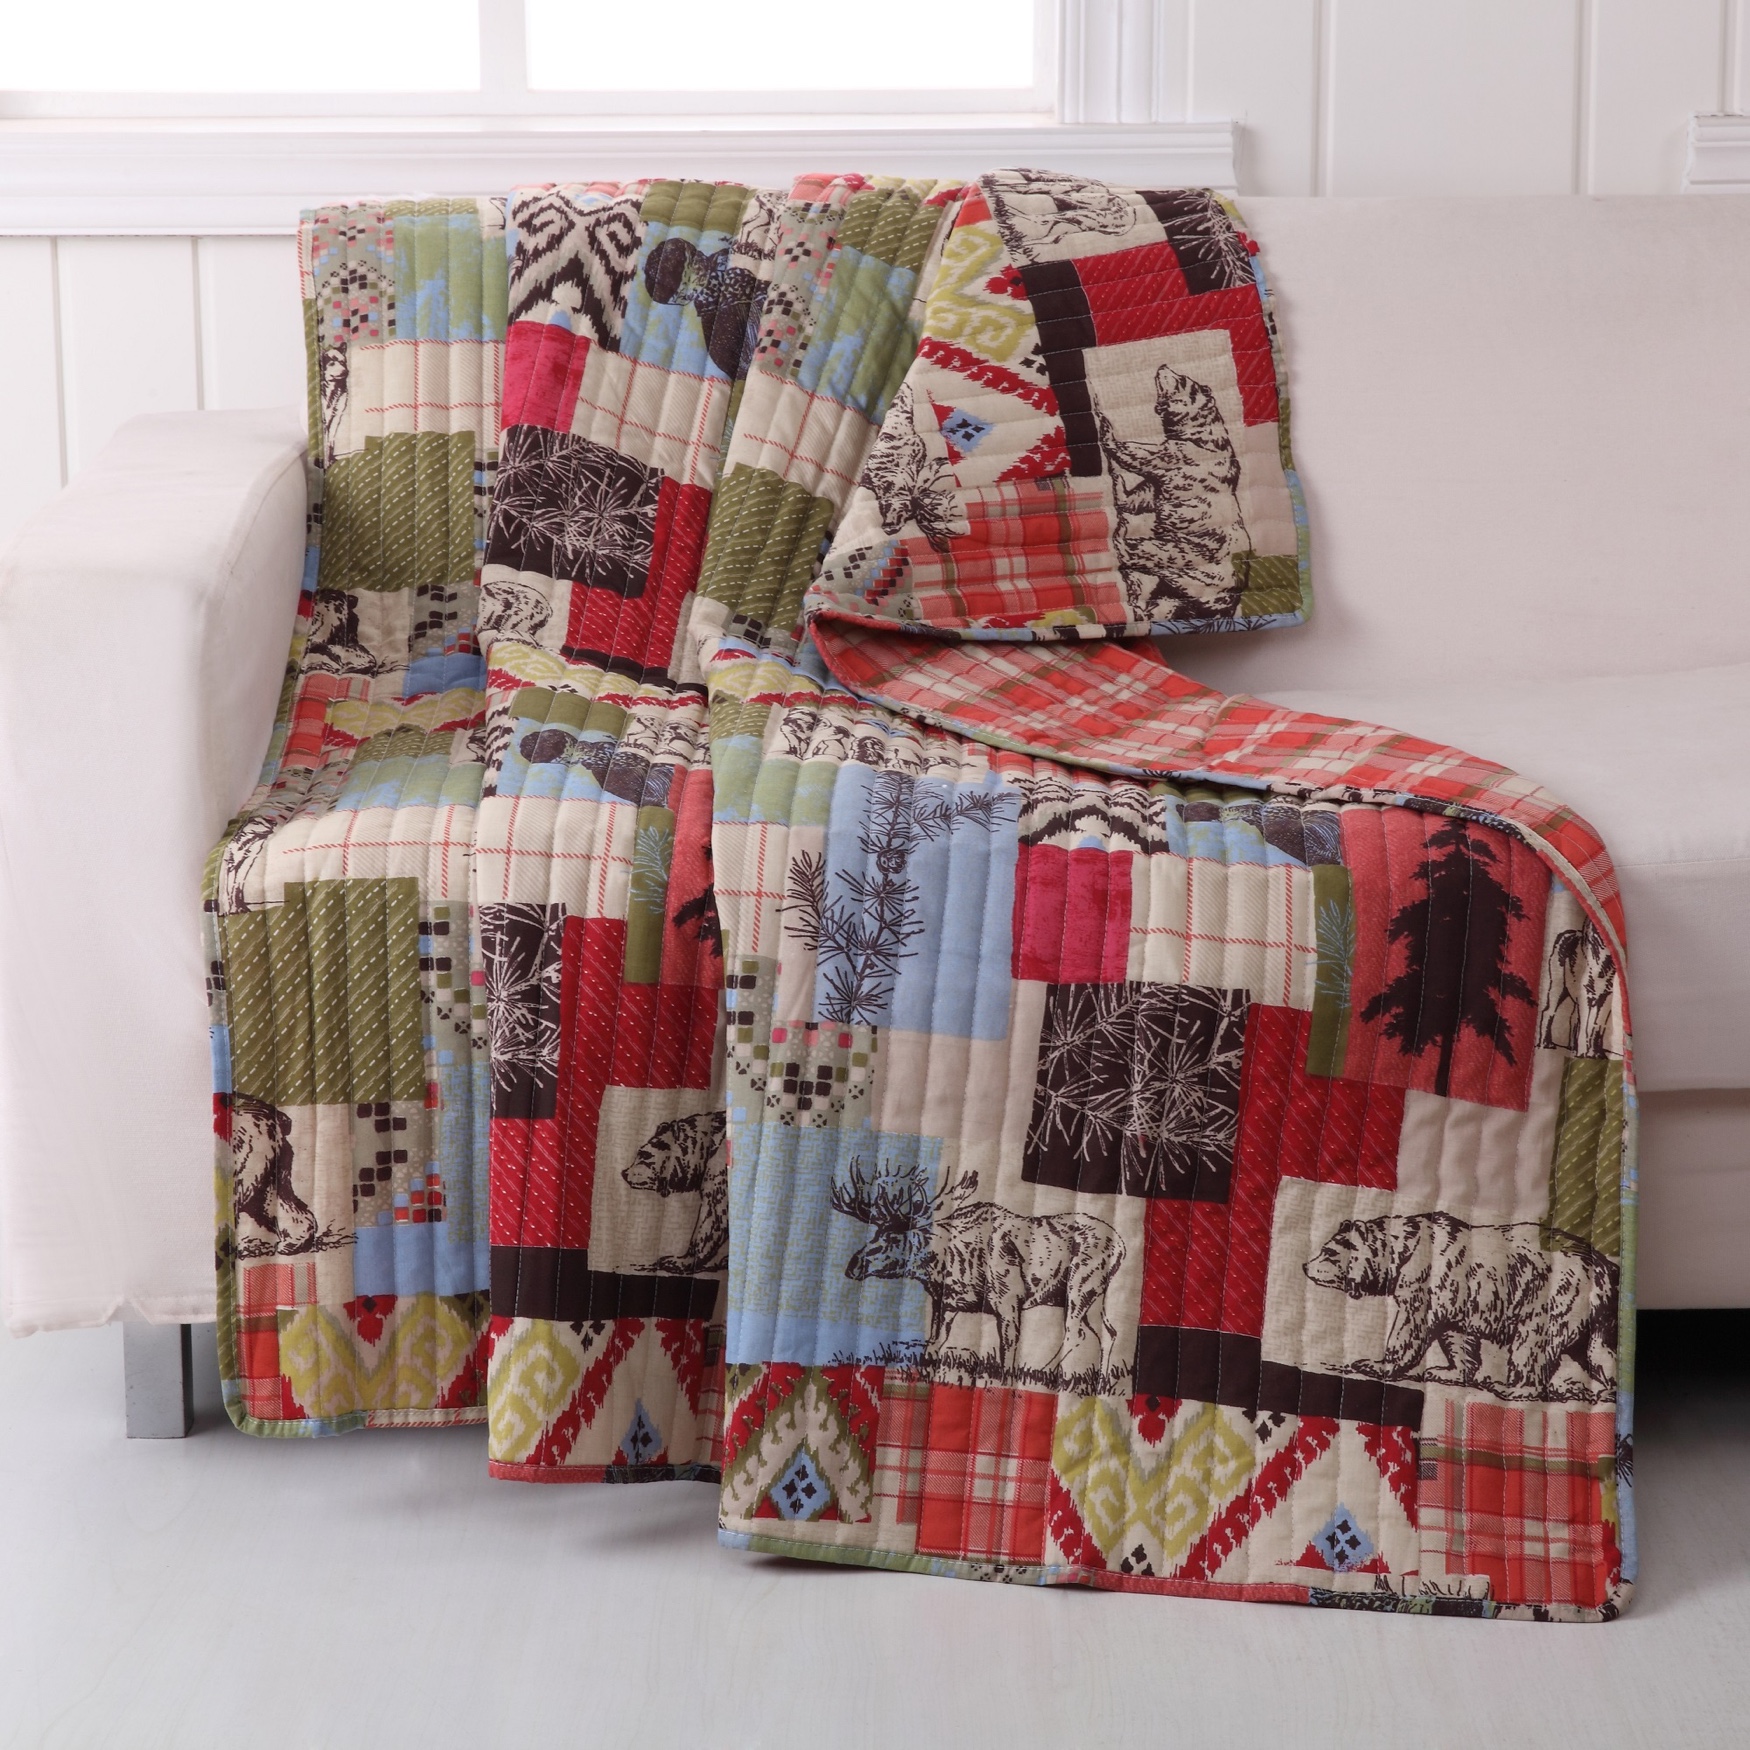 Rustic Lodge Quilted Throw Blanket, MULTI